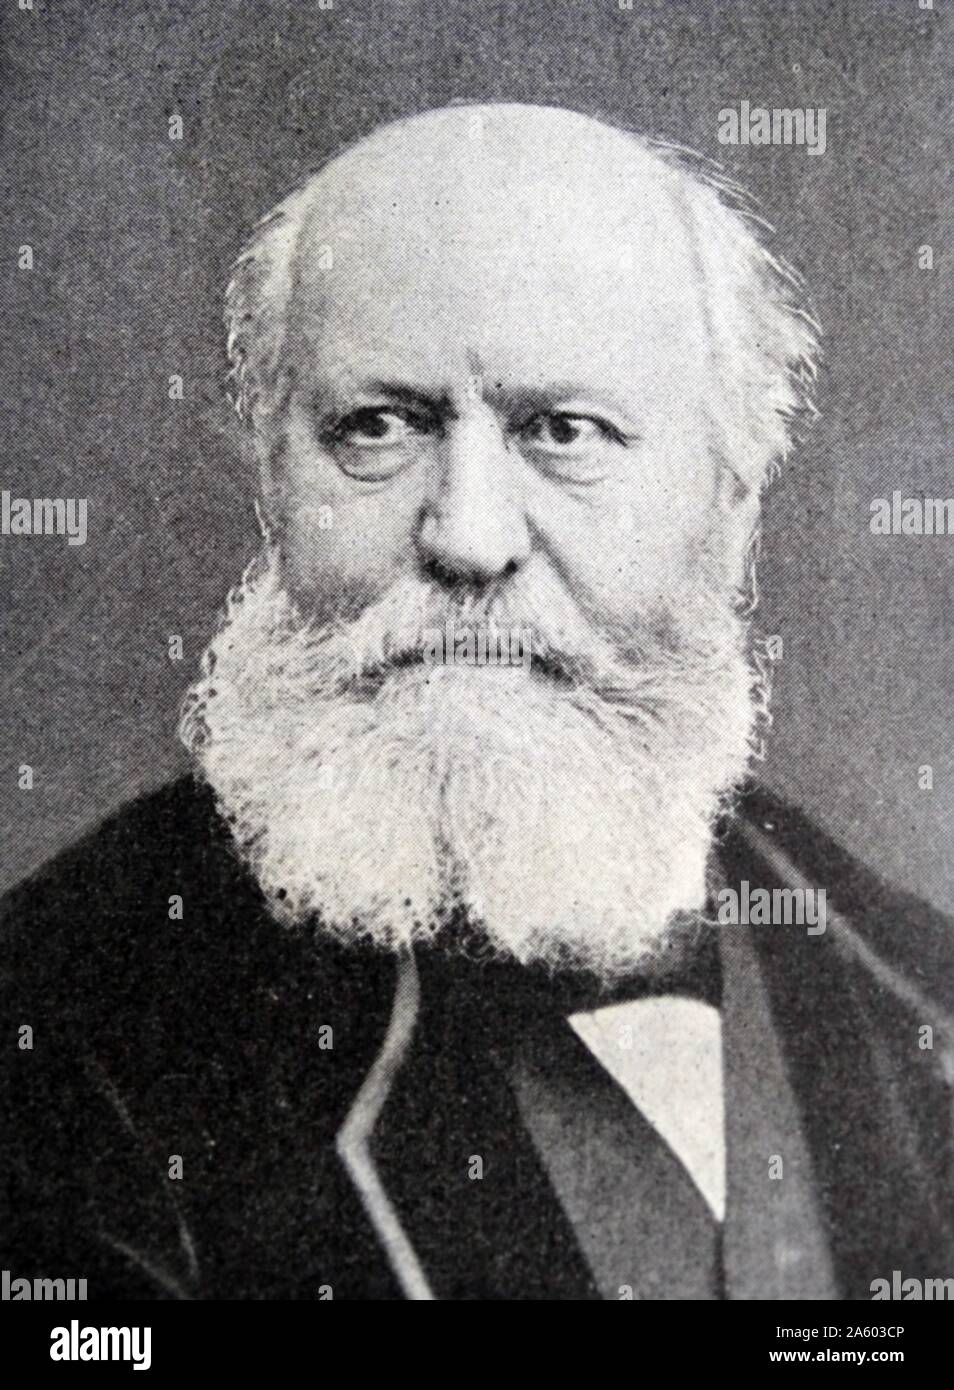 Photographic portrait of Charles-François Gounod (1818-1893) a French composer, known for his Ave Maria, based on a work by Bach, as well as his opera Faust. Dated 19th Century Stock Photo